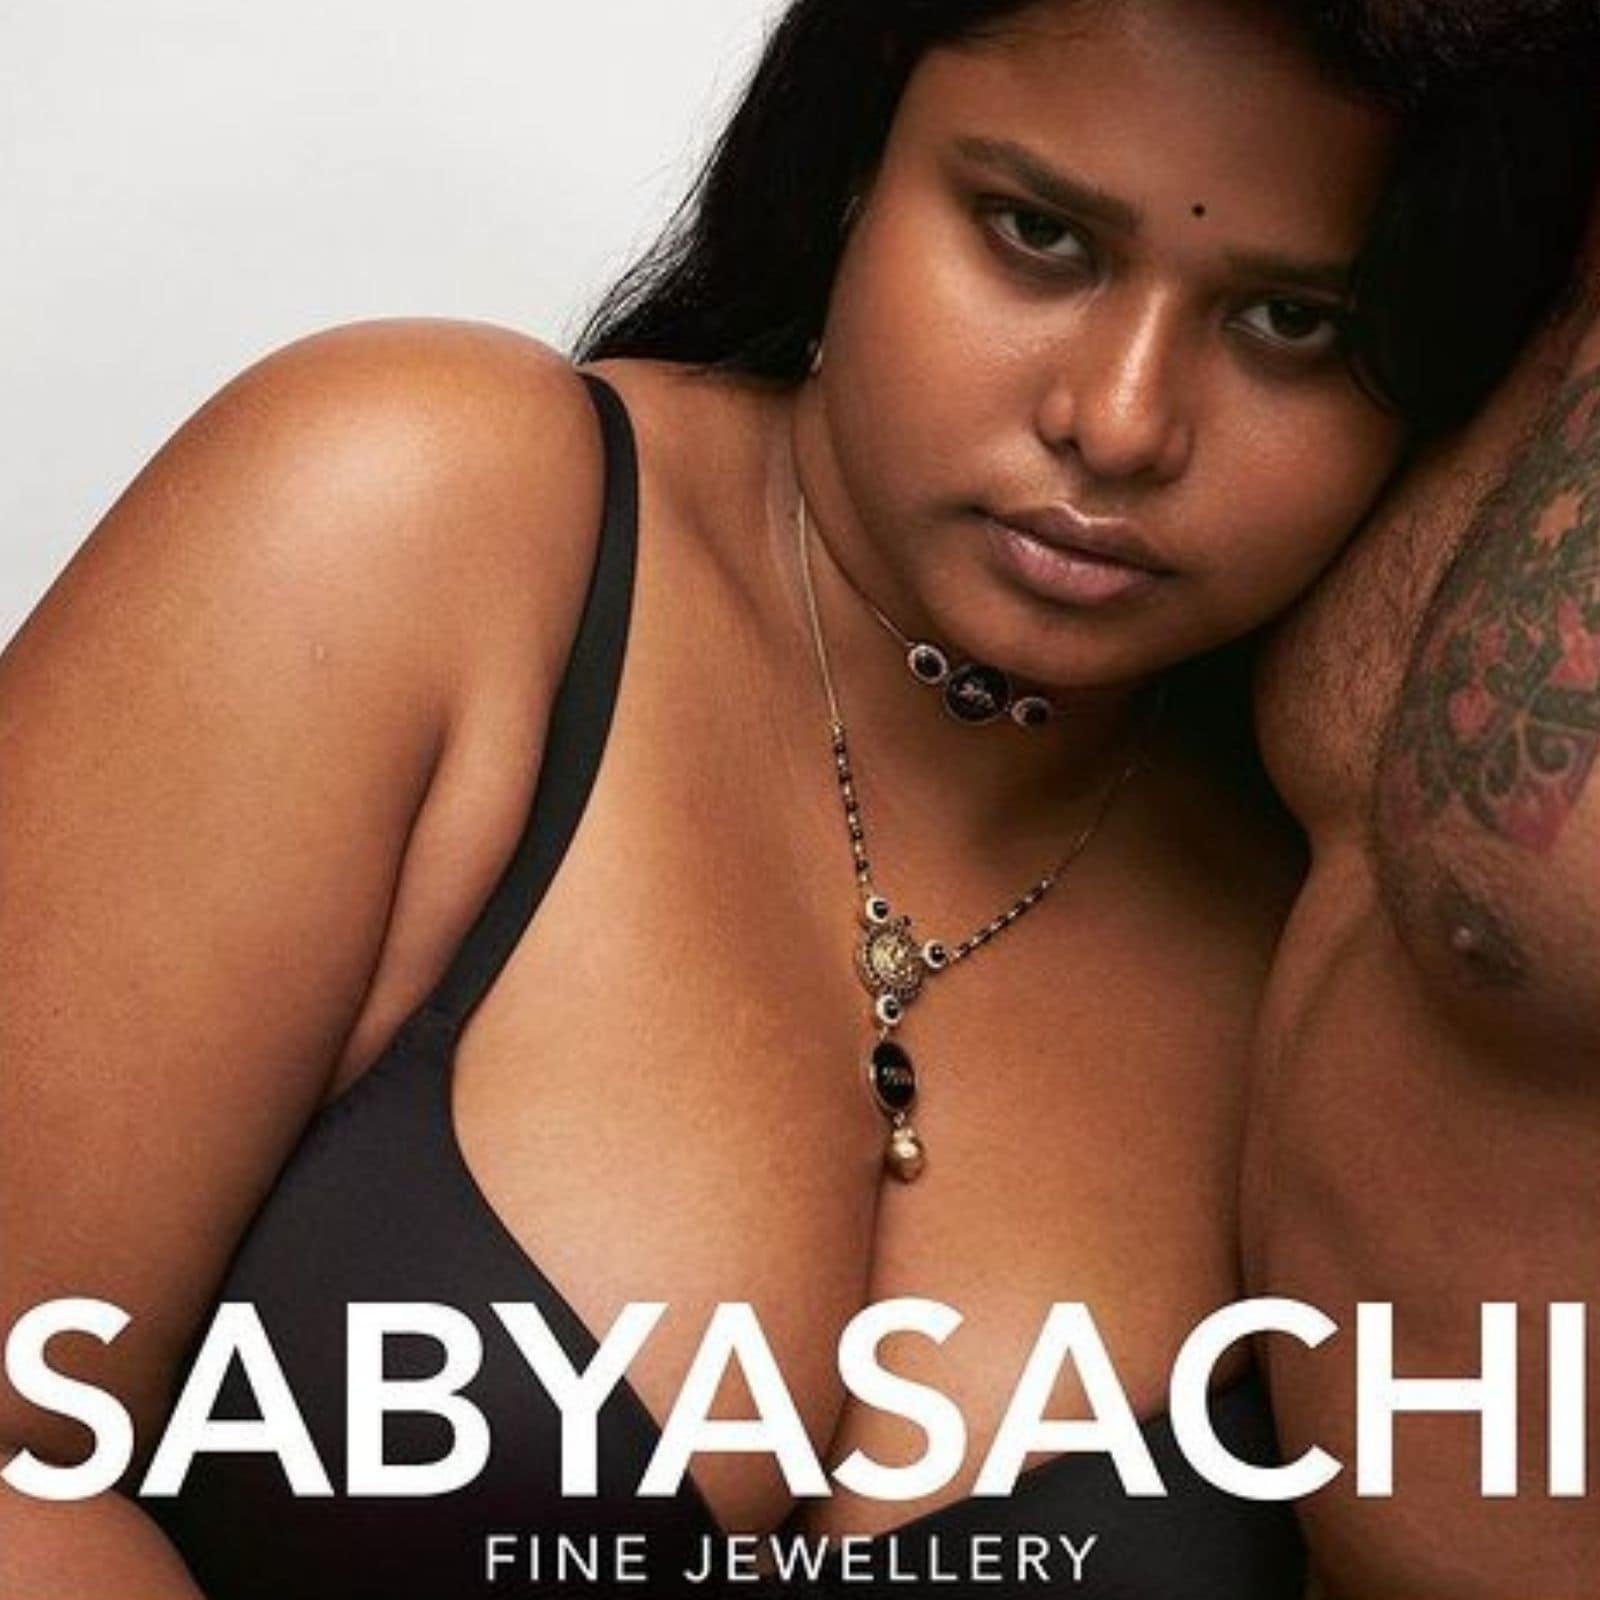 Meena Sex Photos - Sabyasachi's New Campaign Faces Flak For Featuring Mangalsutra as 'Fashion  Jewellery'